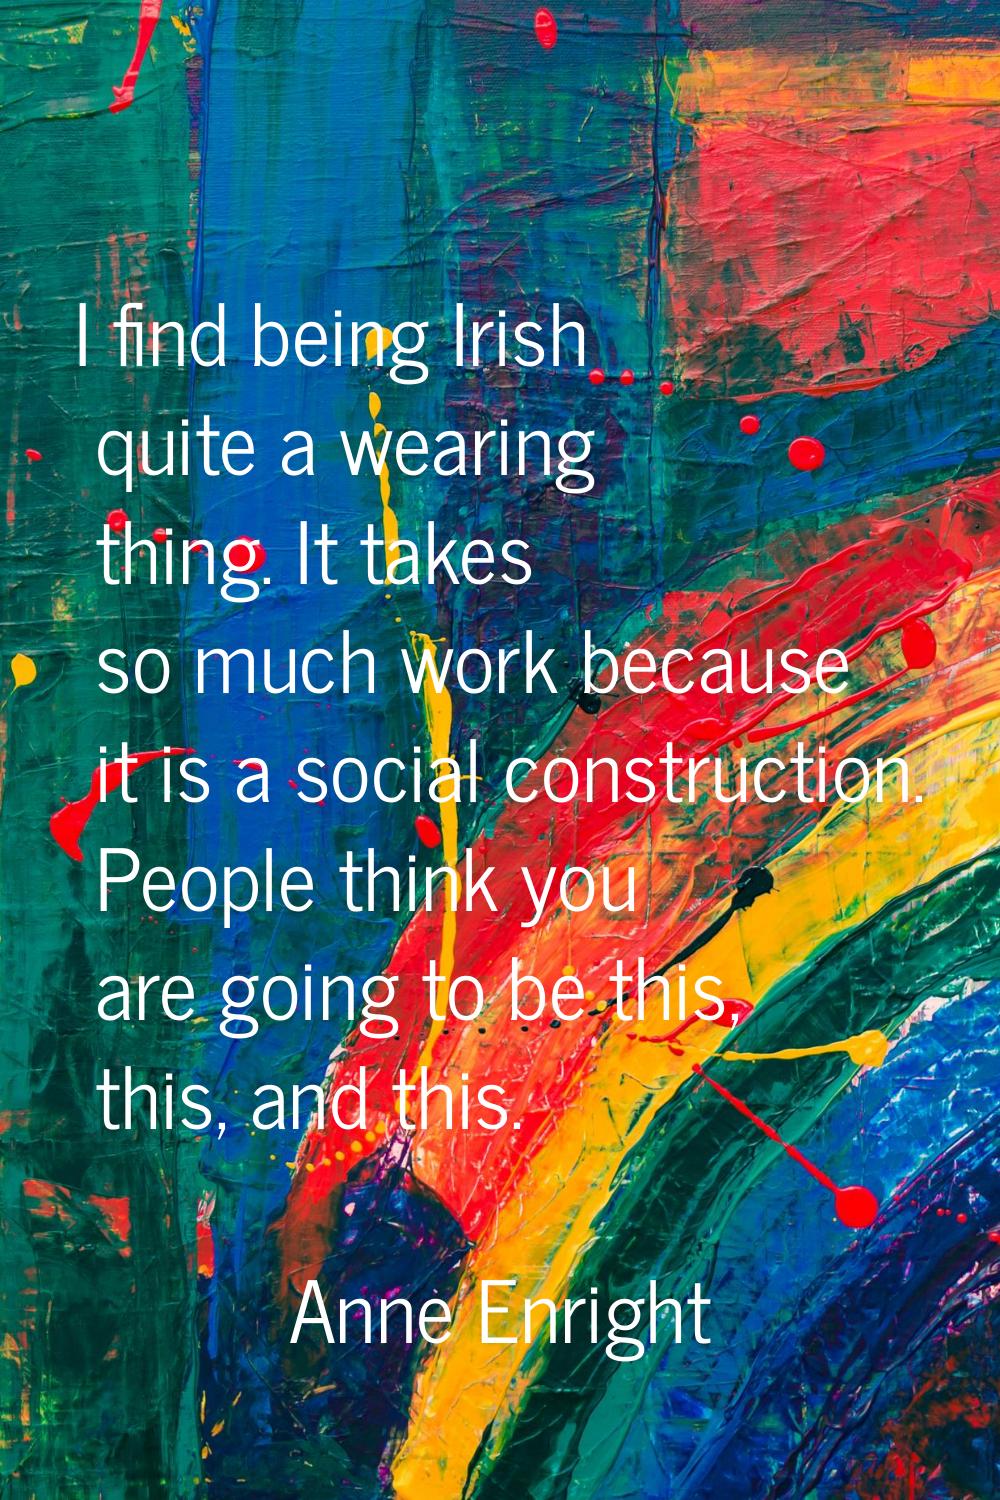 I find being Irish quite a wearing thing. It takes so much work because it is a social construction